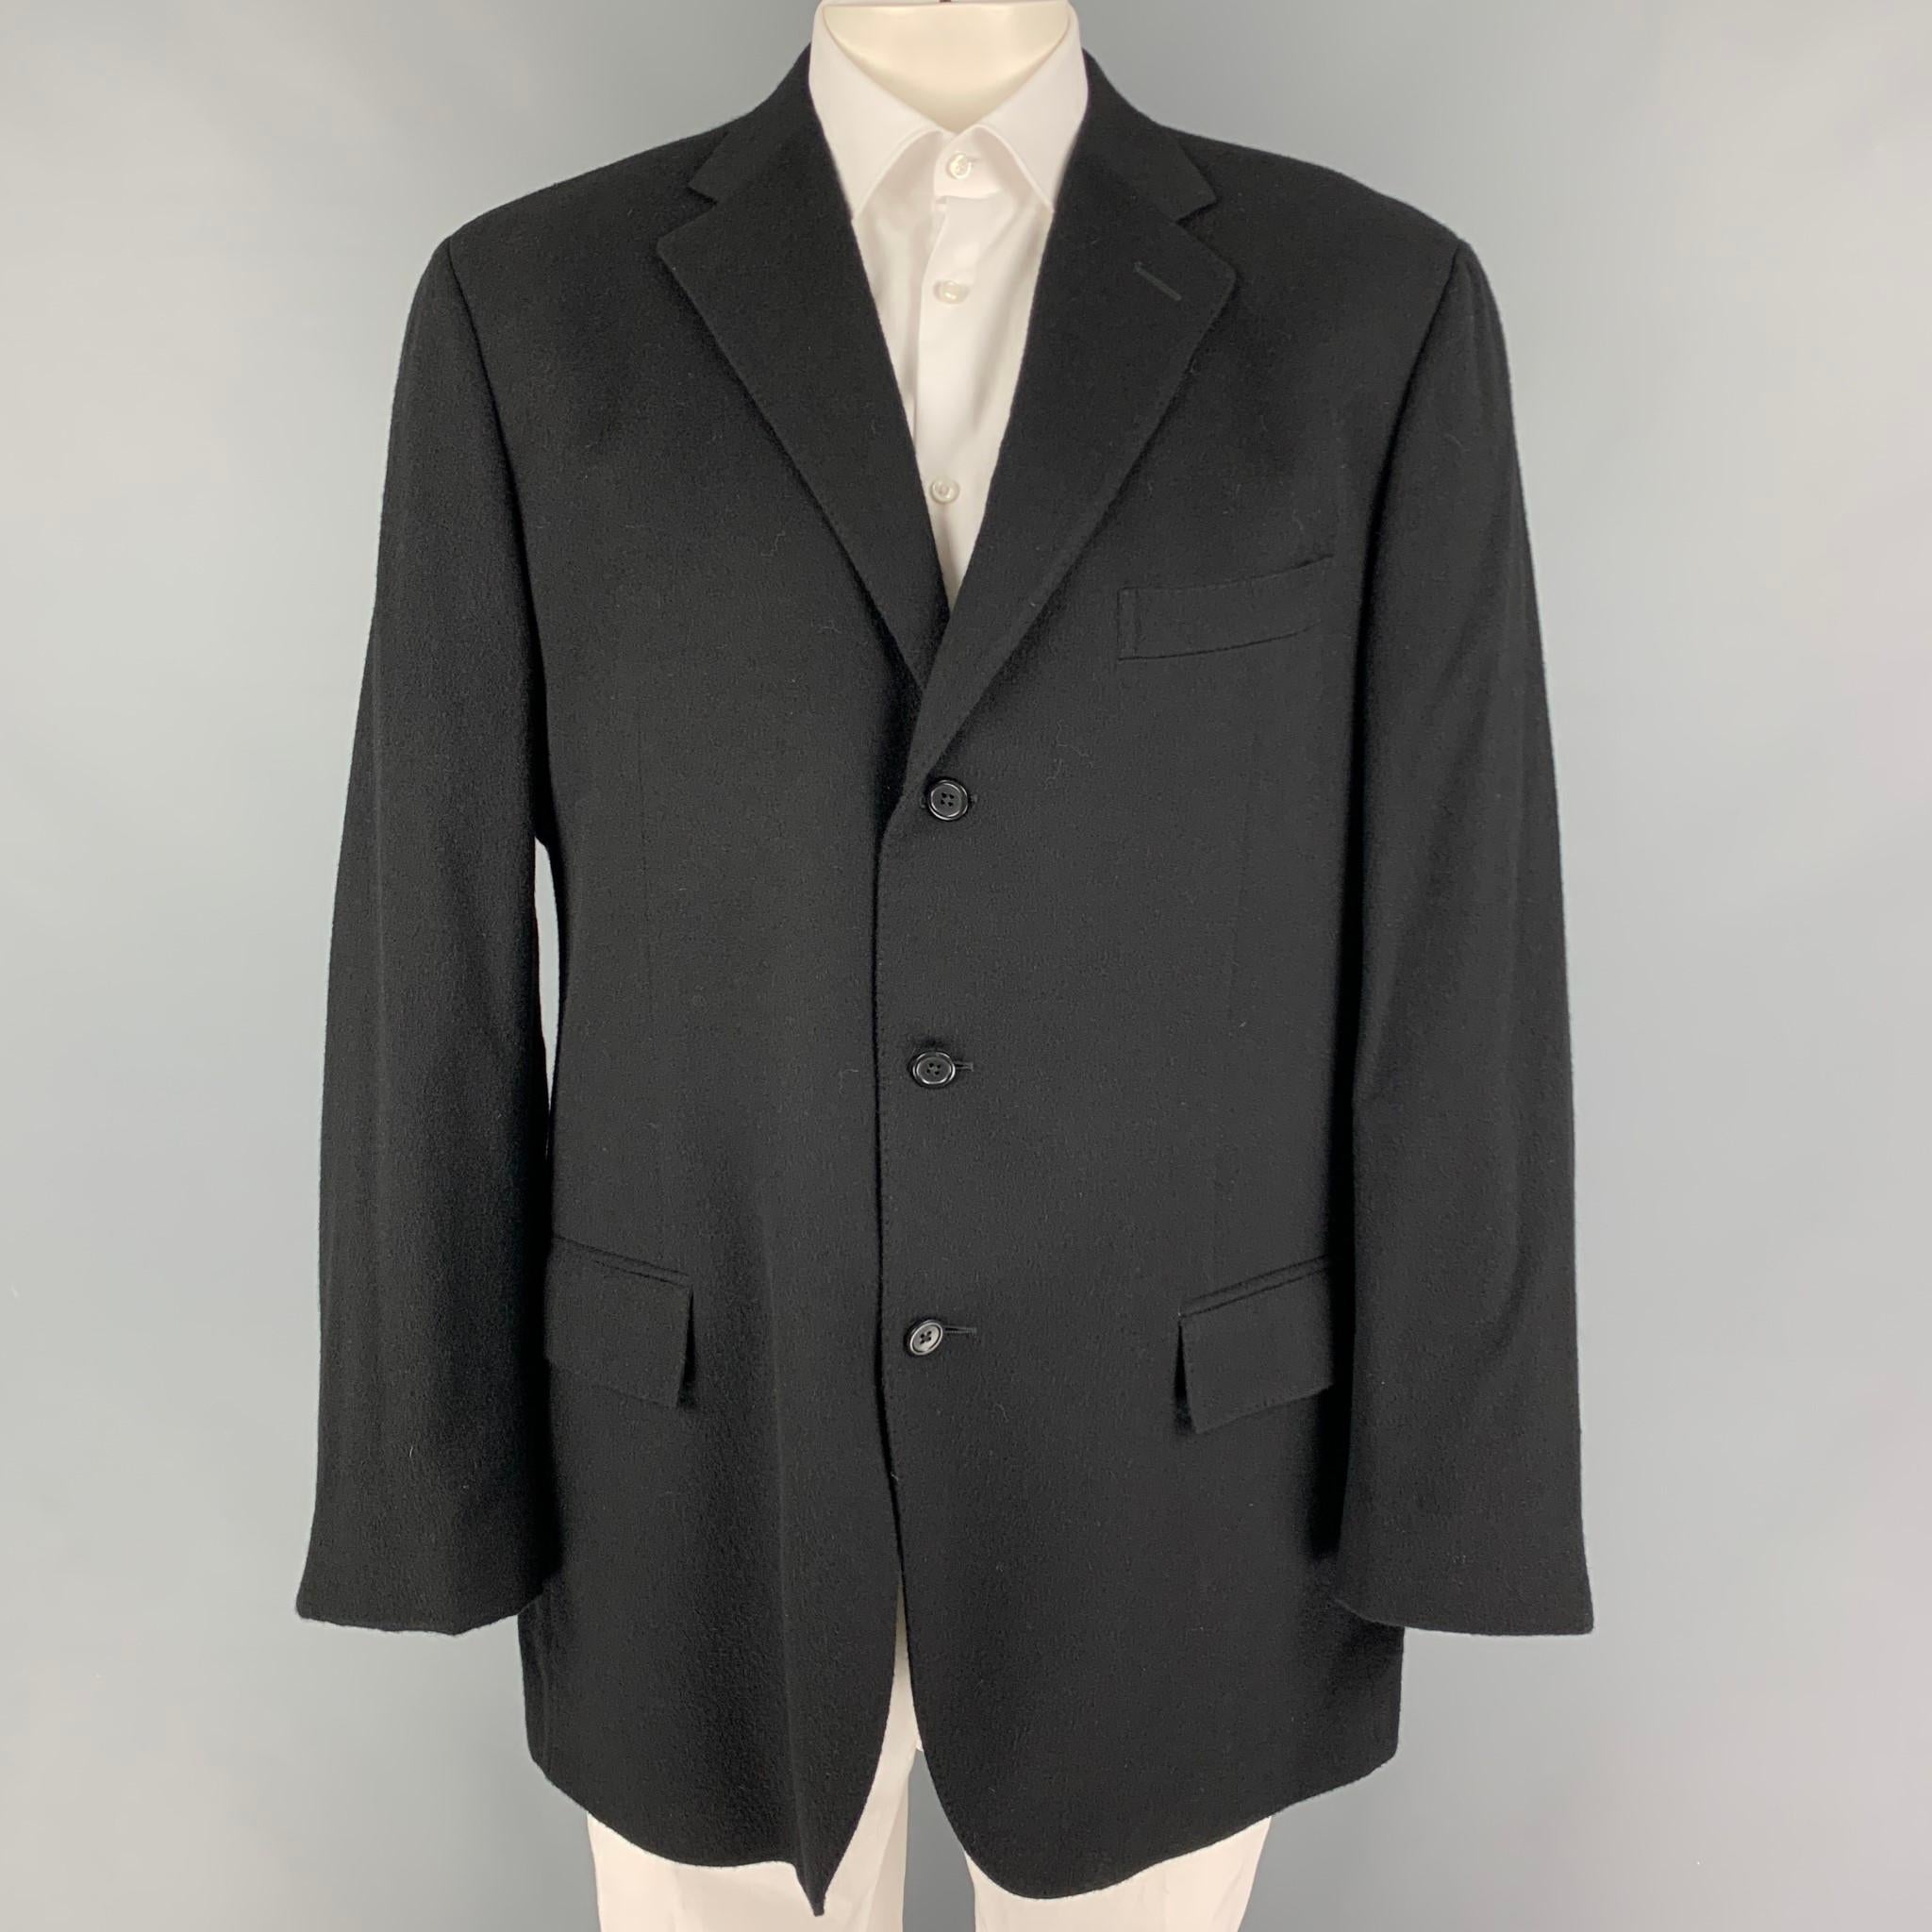 POLO by RALPH LAUREN sport coat comes in a black cashmere featuring a notch lapel, flap pockets, double back vent, and a three button closure. Made in Italy. 

Very Good Pre-Owned Condition.
Marked: 46 L

Measurements:

Shoulder: 20 in.
Chest: 46